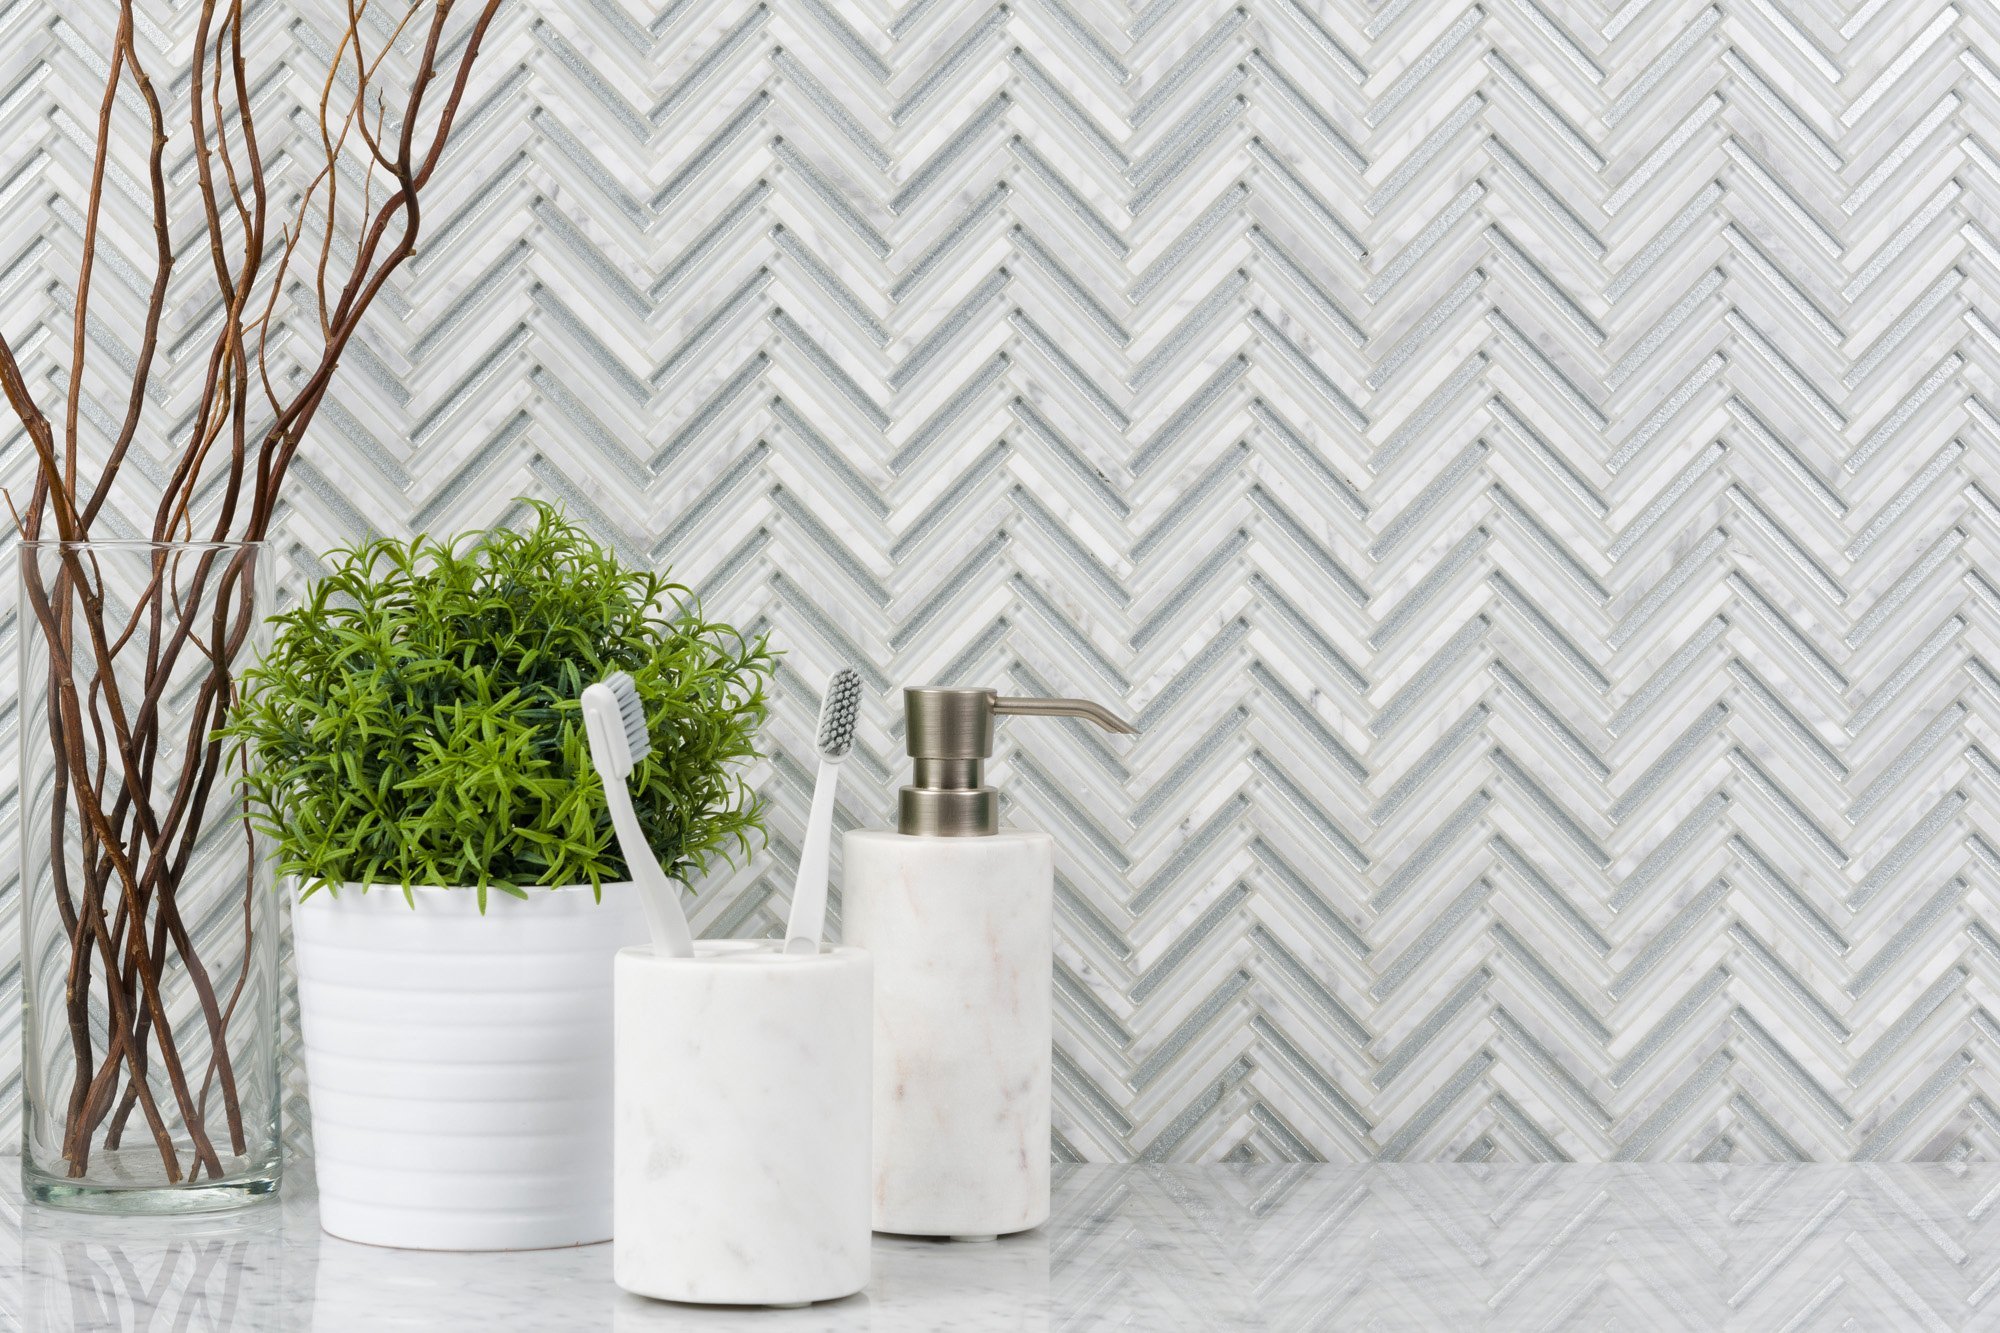 You are currently viewing Our Rarest Suspicion about Herringbone Tiles in Kitchen Patterns